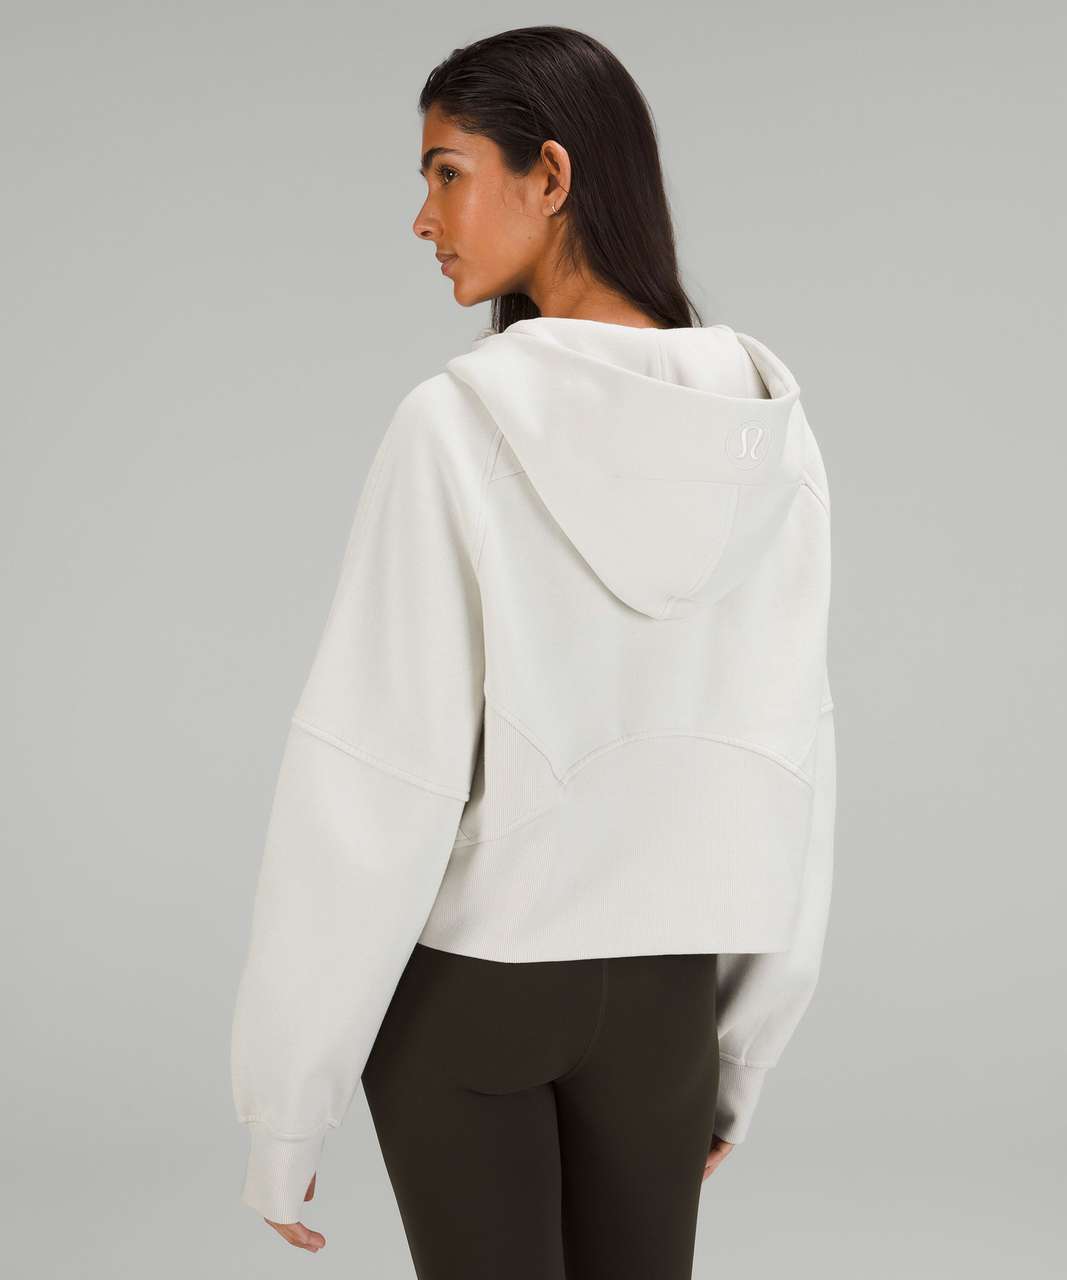 Im obsessed with this oversized scuba half zip from @lululemon 👼🏻🫶☁